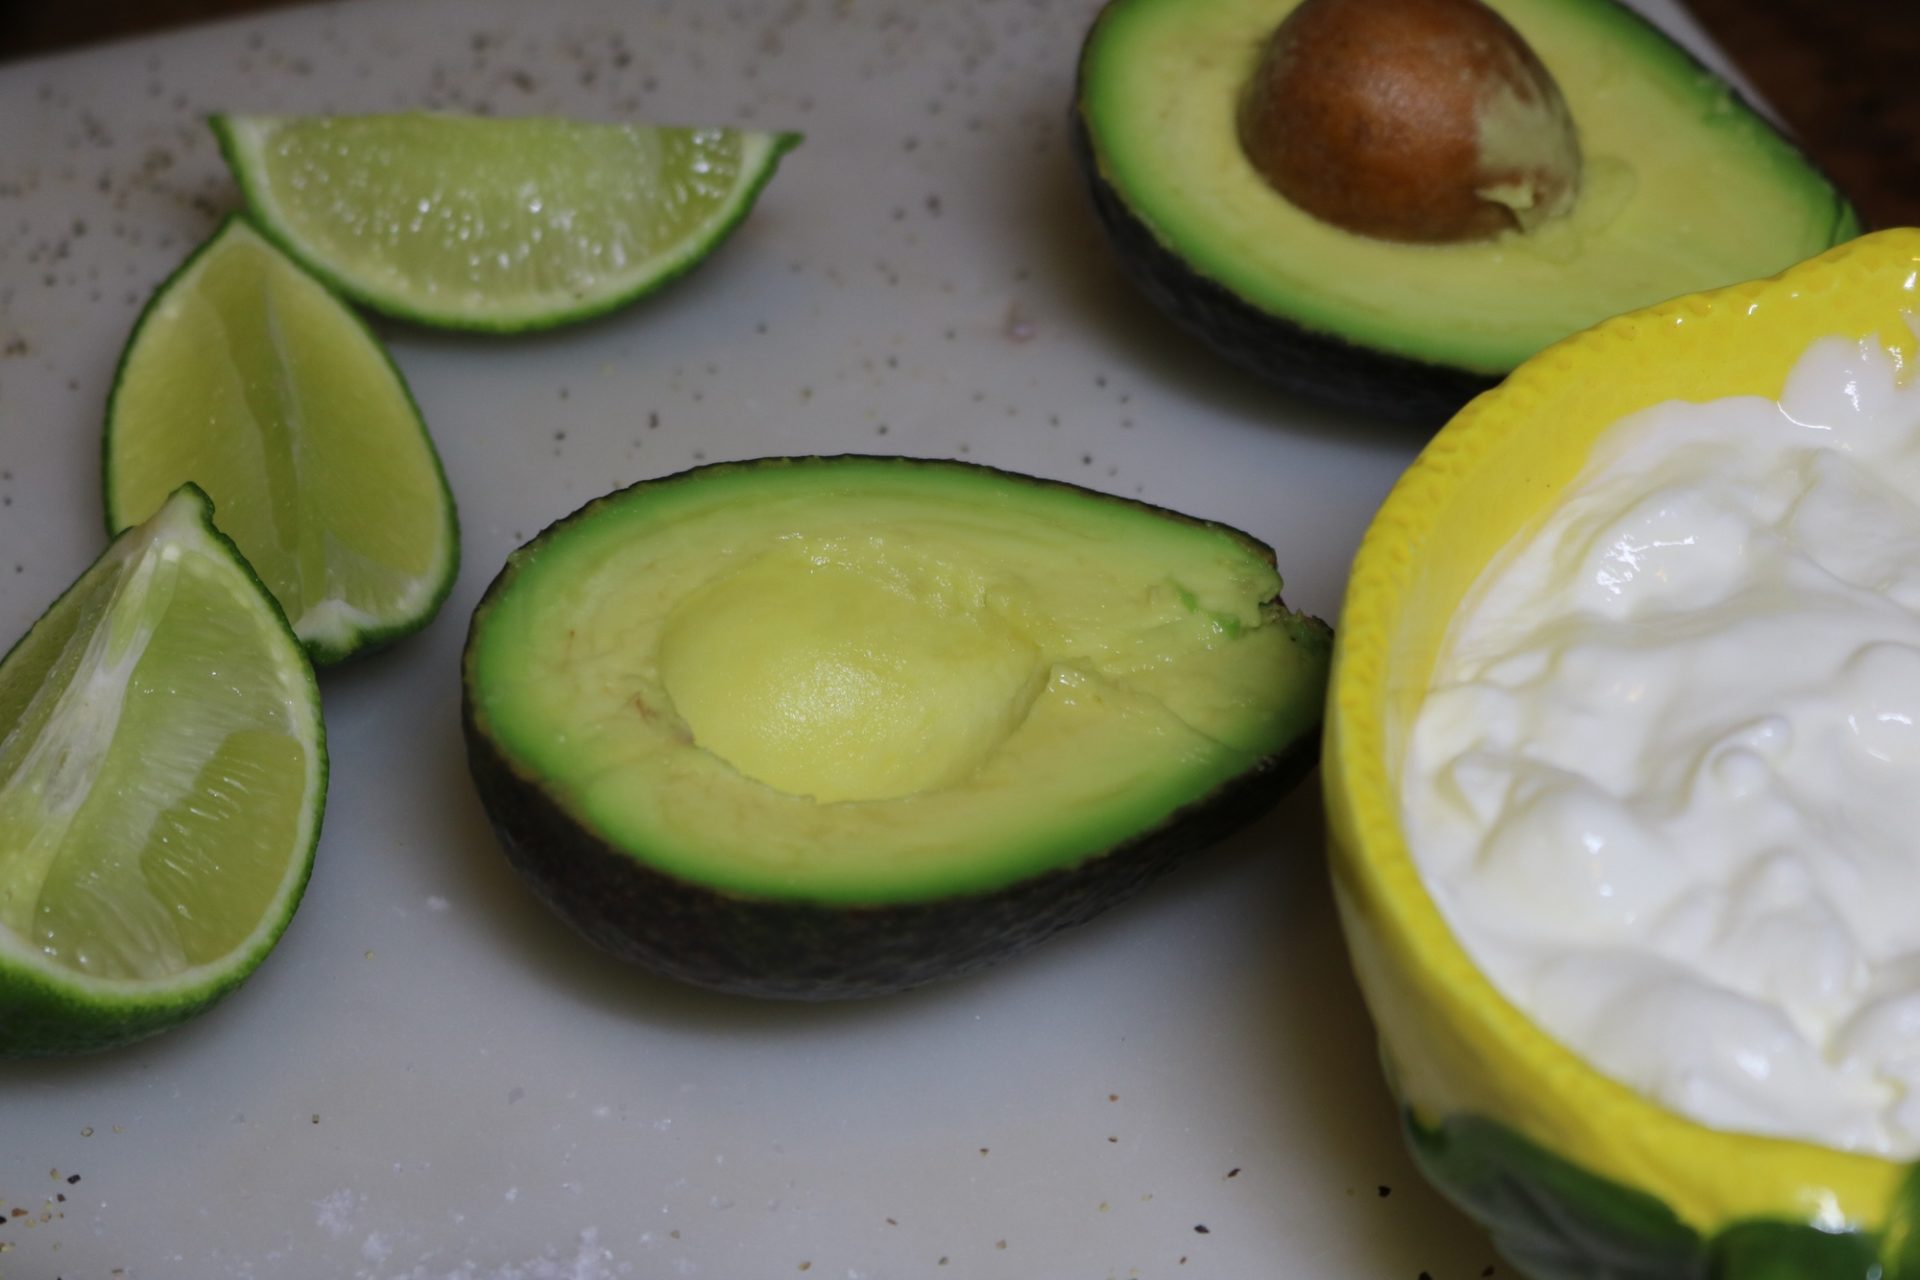 Avocado Crema - The simple topping that can turn an everyday meal into something magical!